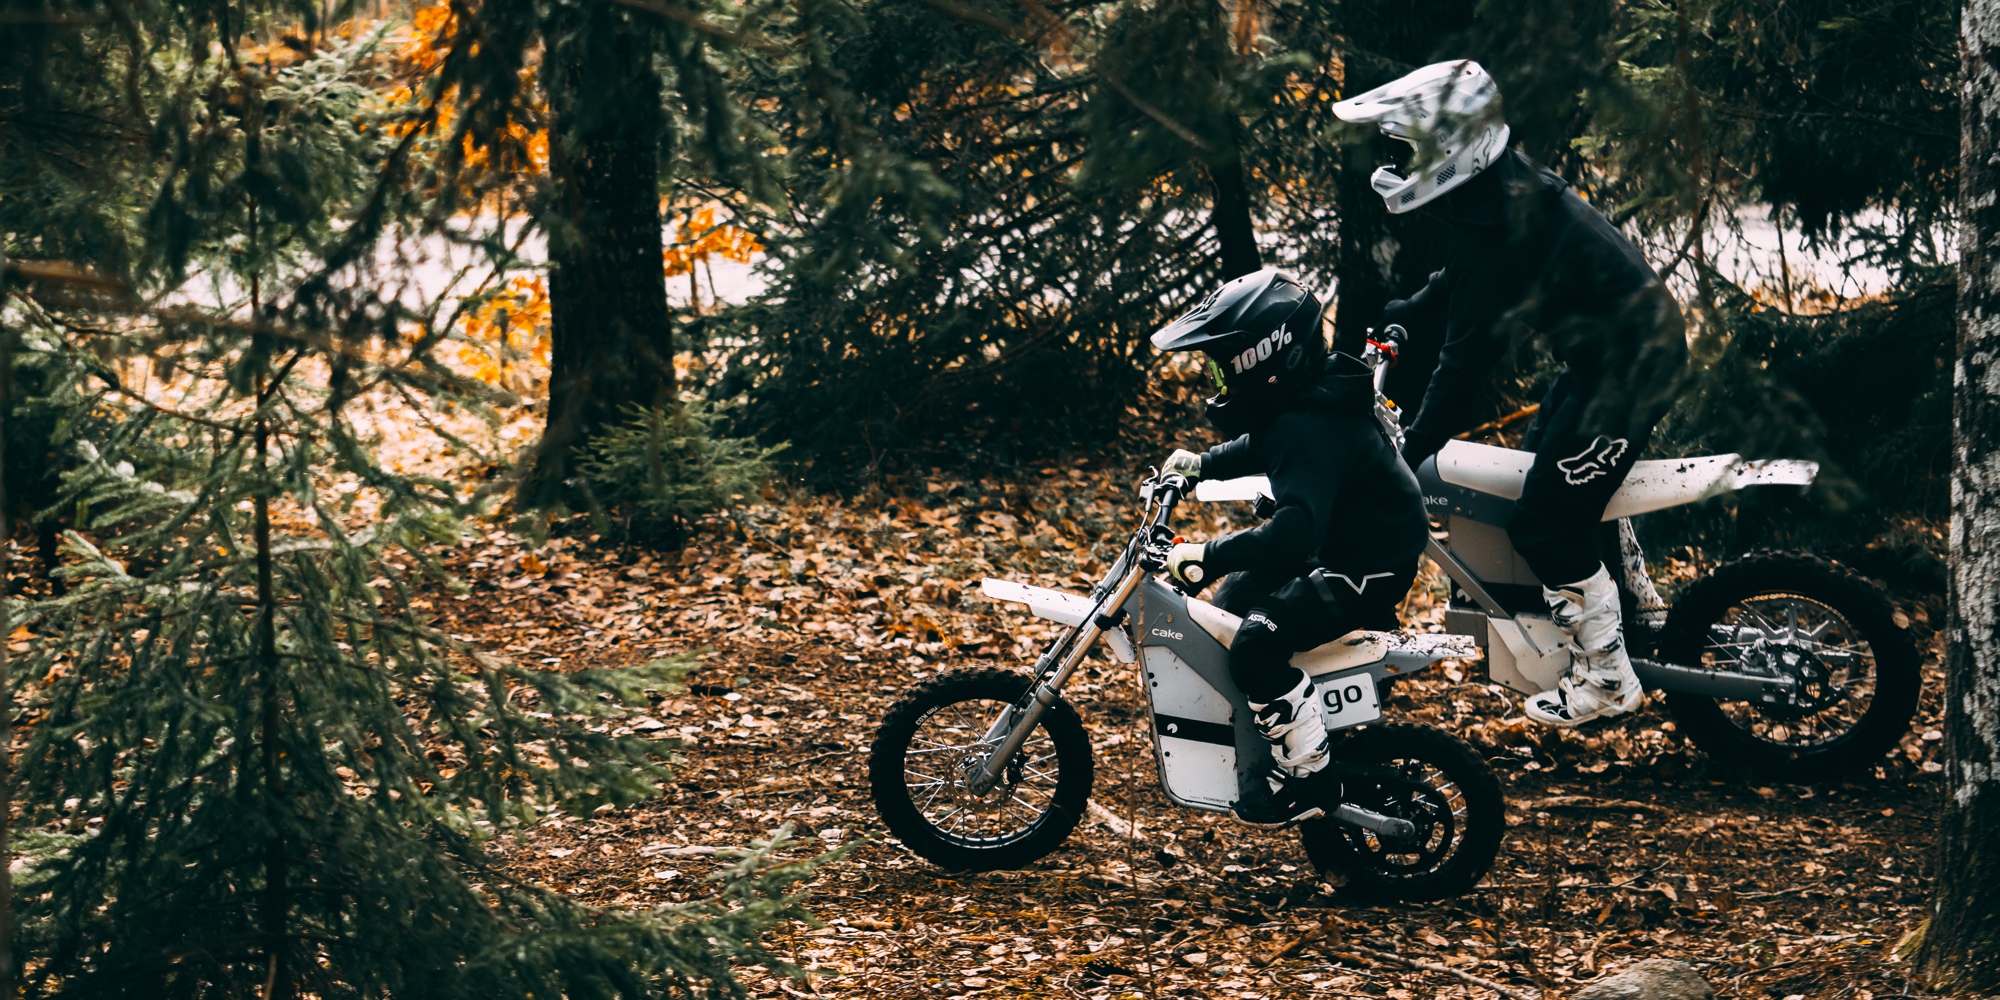 Cake Bukk: New off-road electric motorcycle from Sweden | Visordown